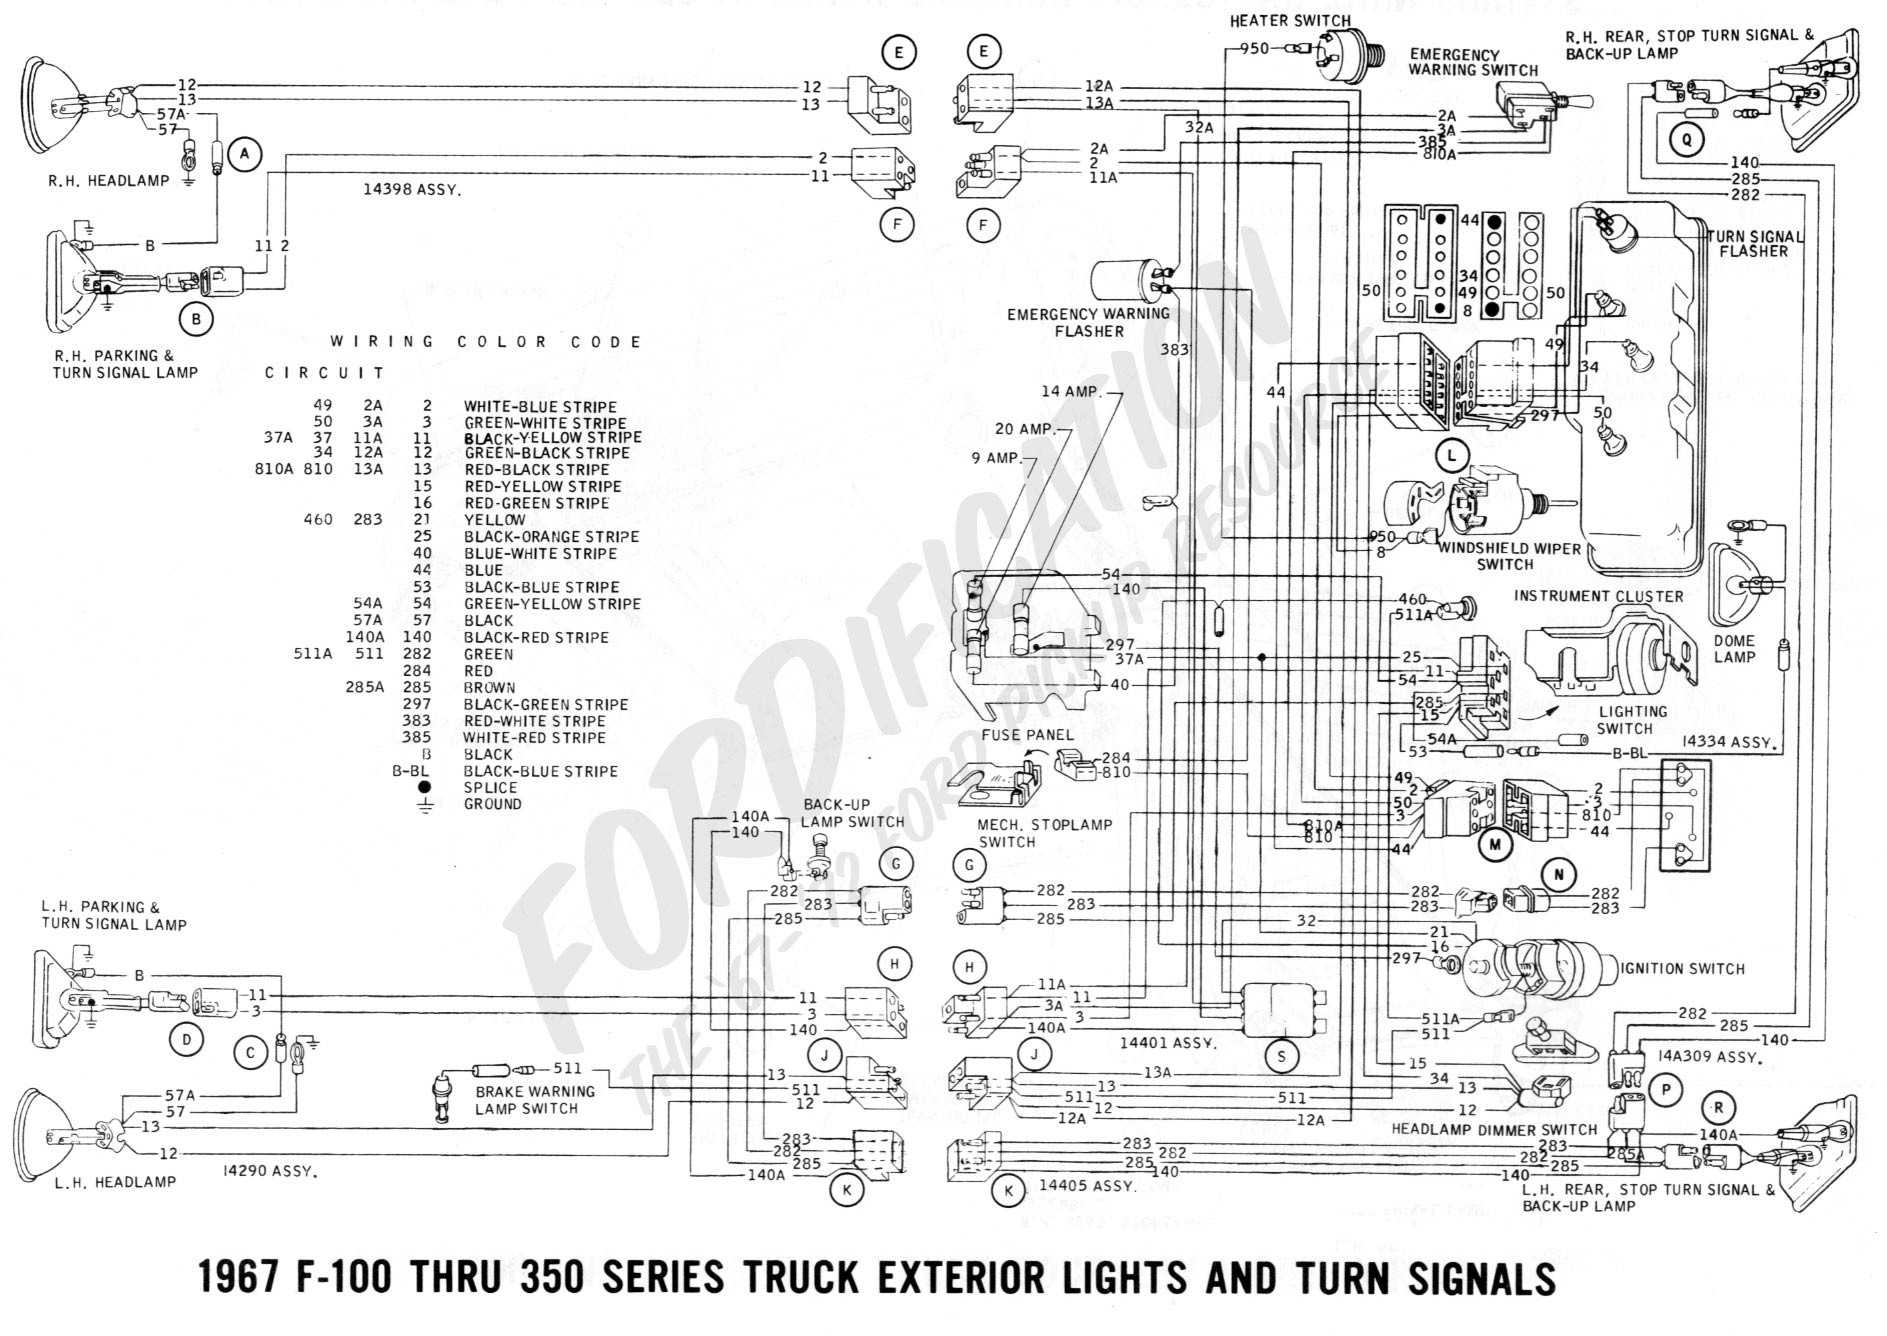 1970 Ford Truck Wiring Diagram from detoxicrecenze.com